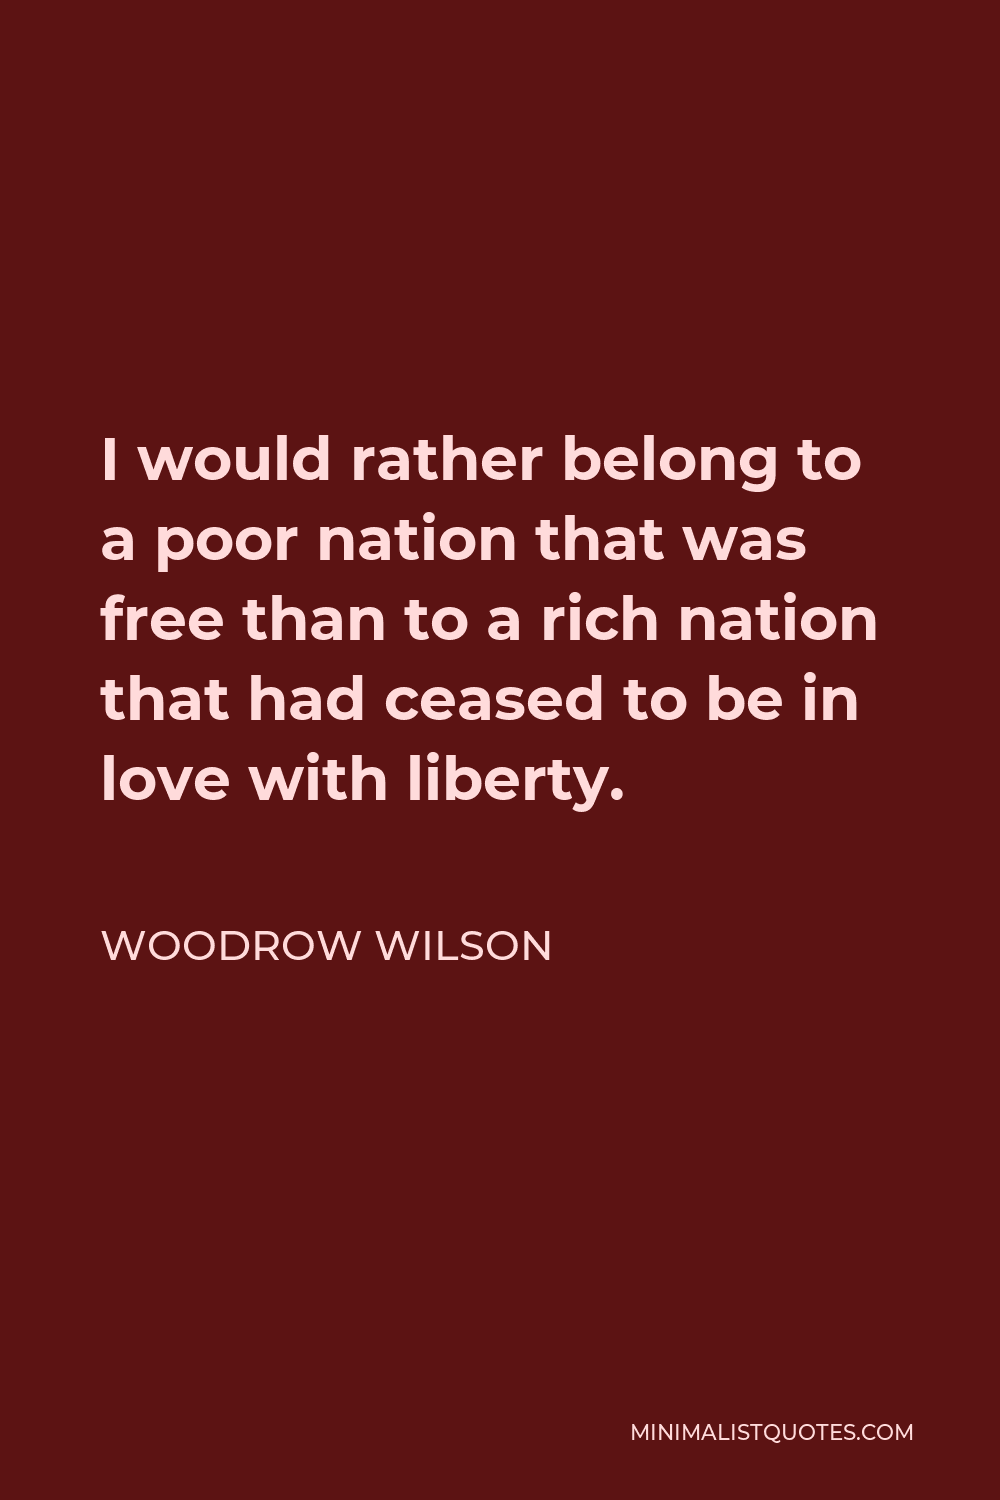 Woodrow Wilson Quote - I would rather belong to a poor nation that was free than to a rich nation that had ceased to be in love with liberty.